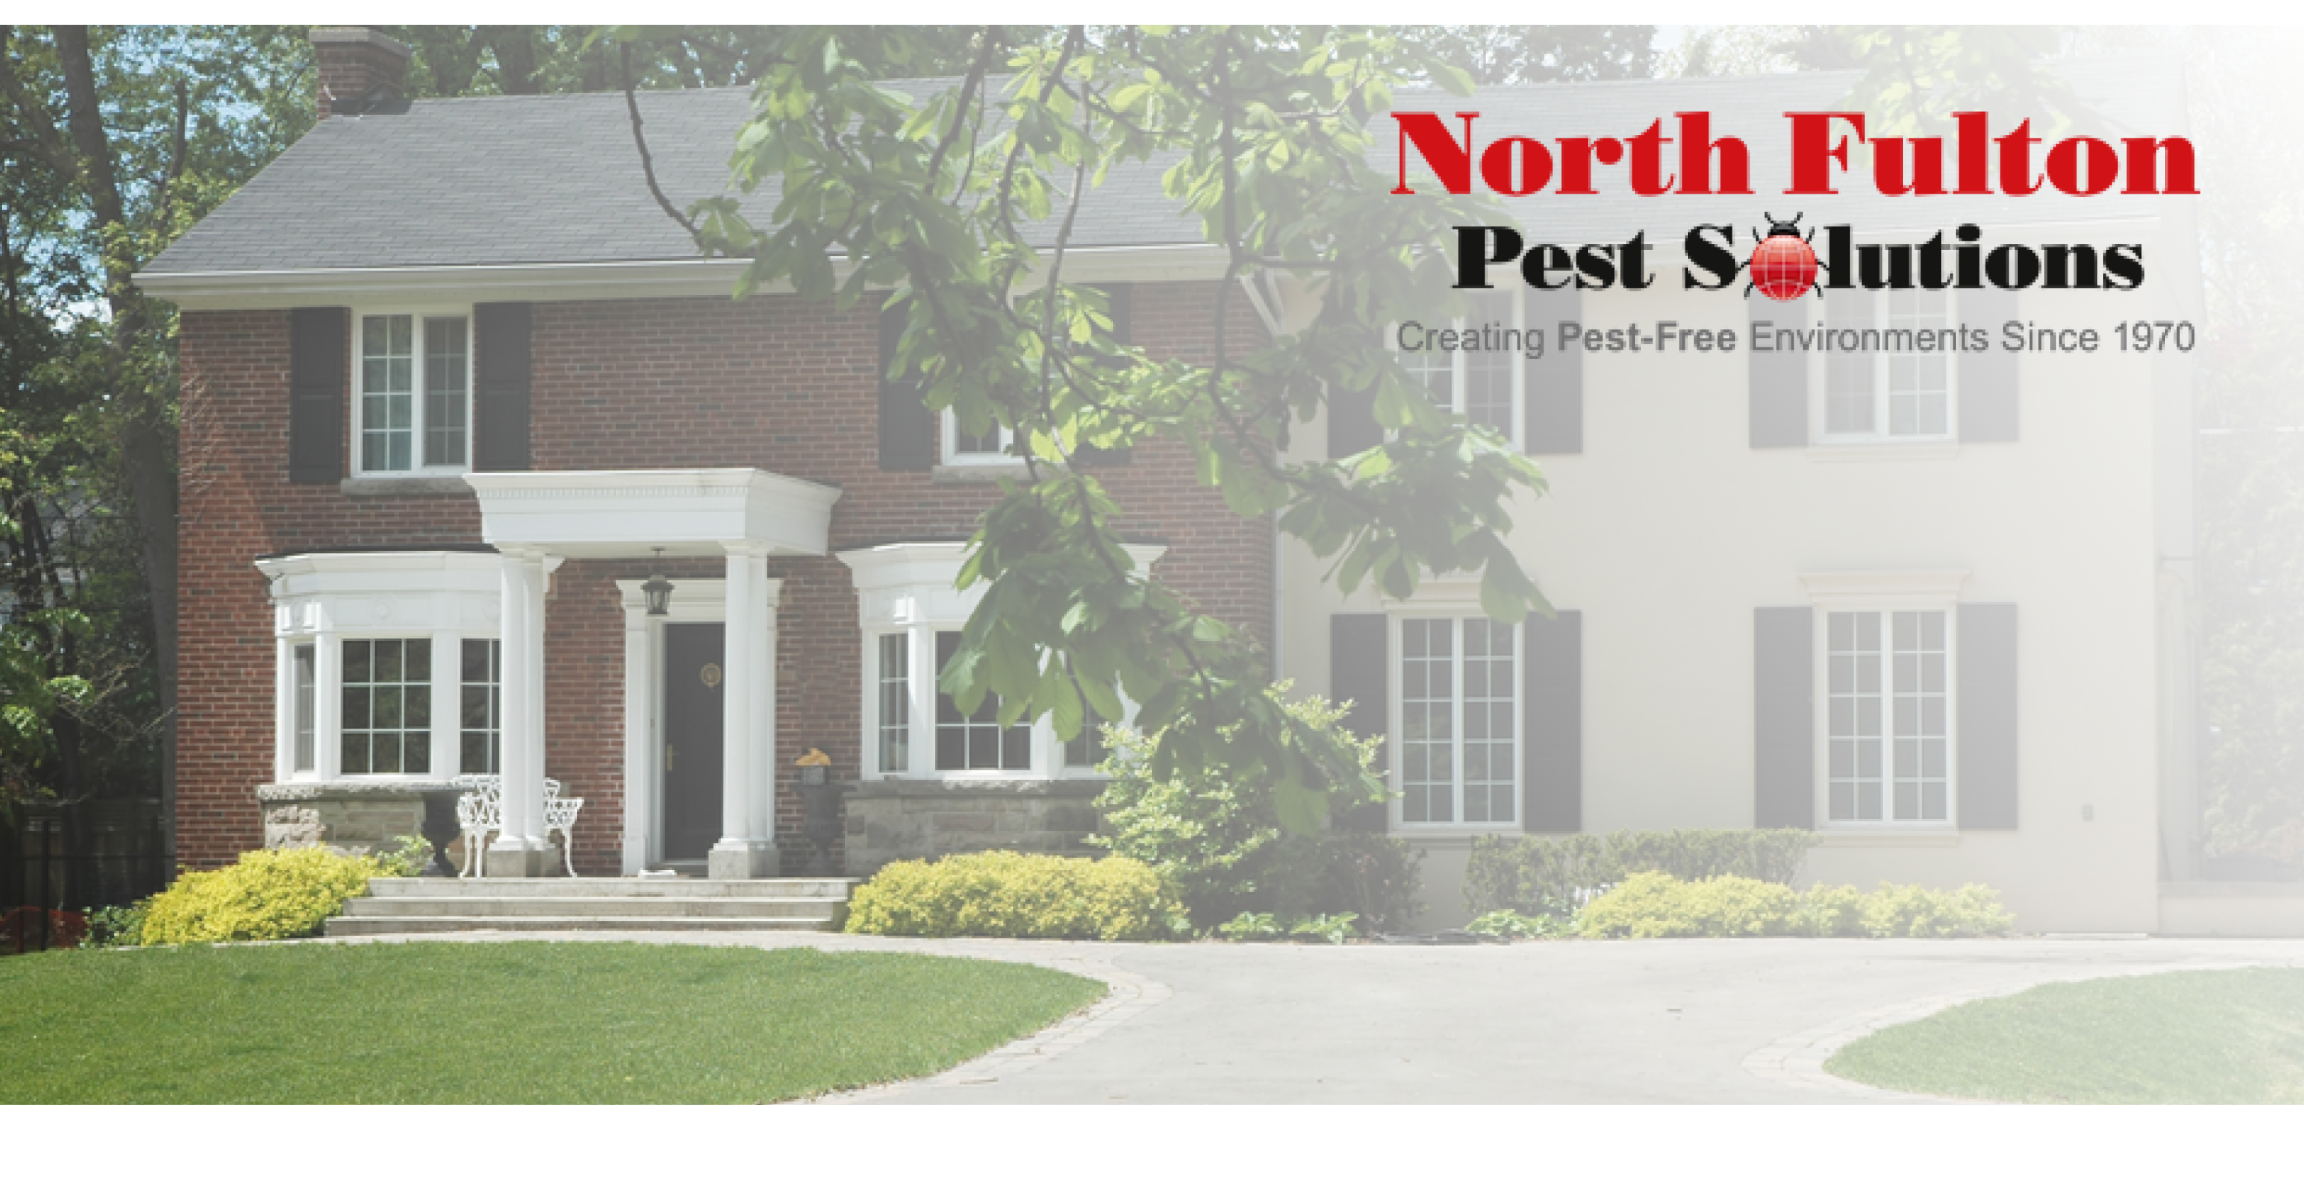 A North Fulton Pest Solutions expert safely conducting wildlife removal in a Johns Creek residence.